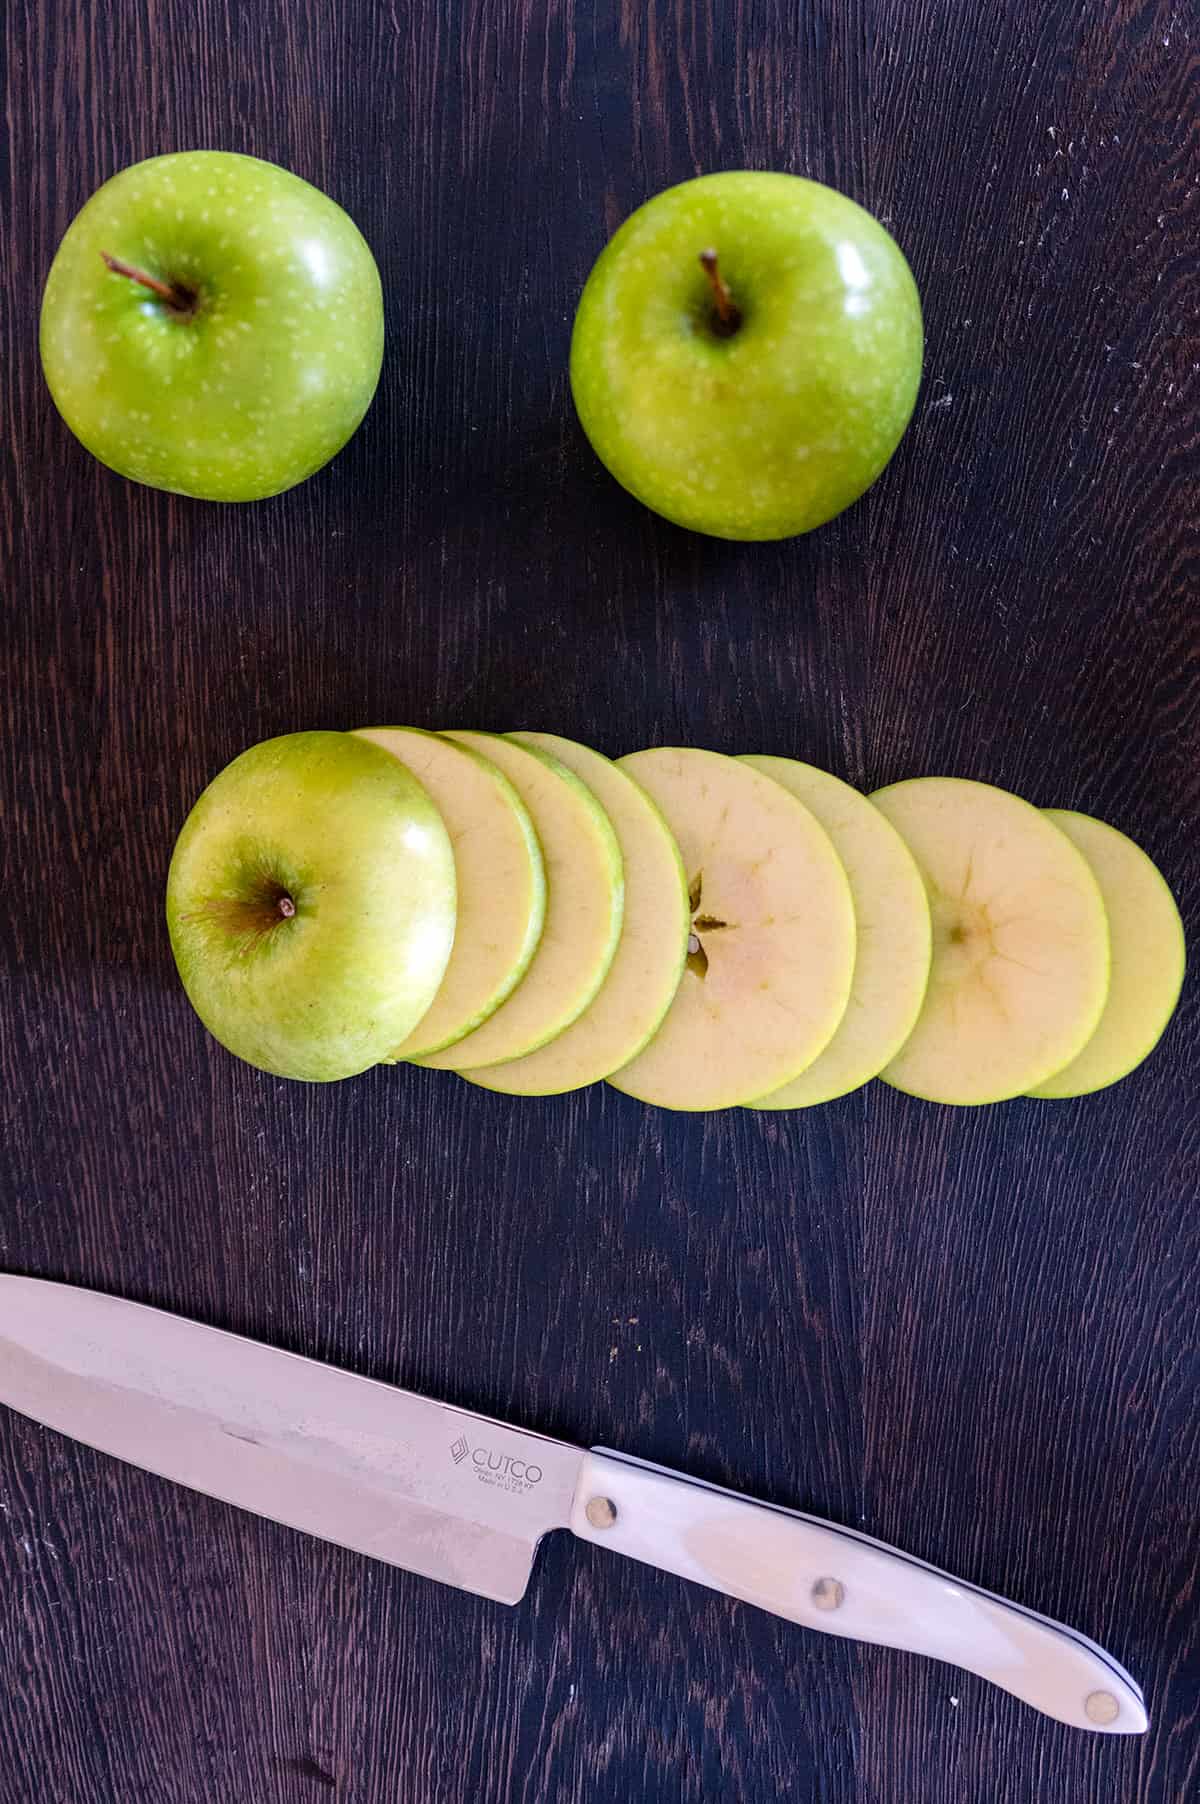 Green apple sliced into 1/8-inch thick slices.